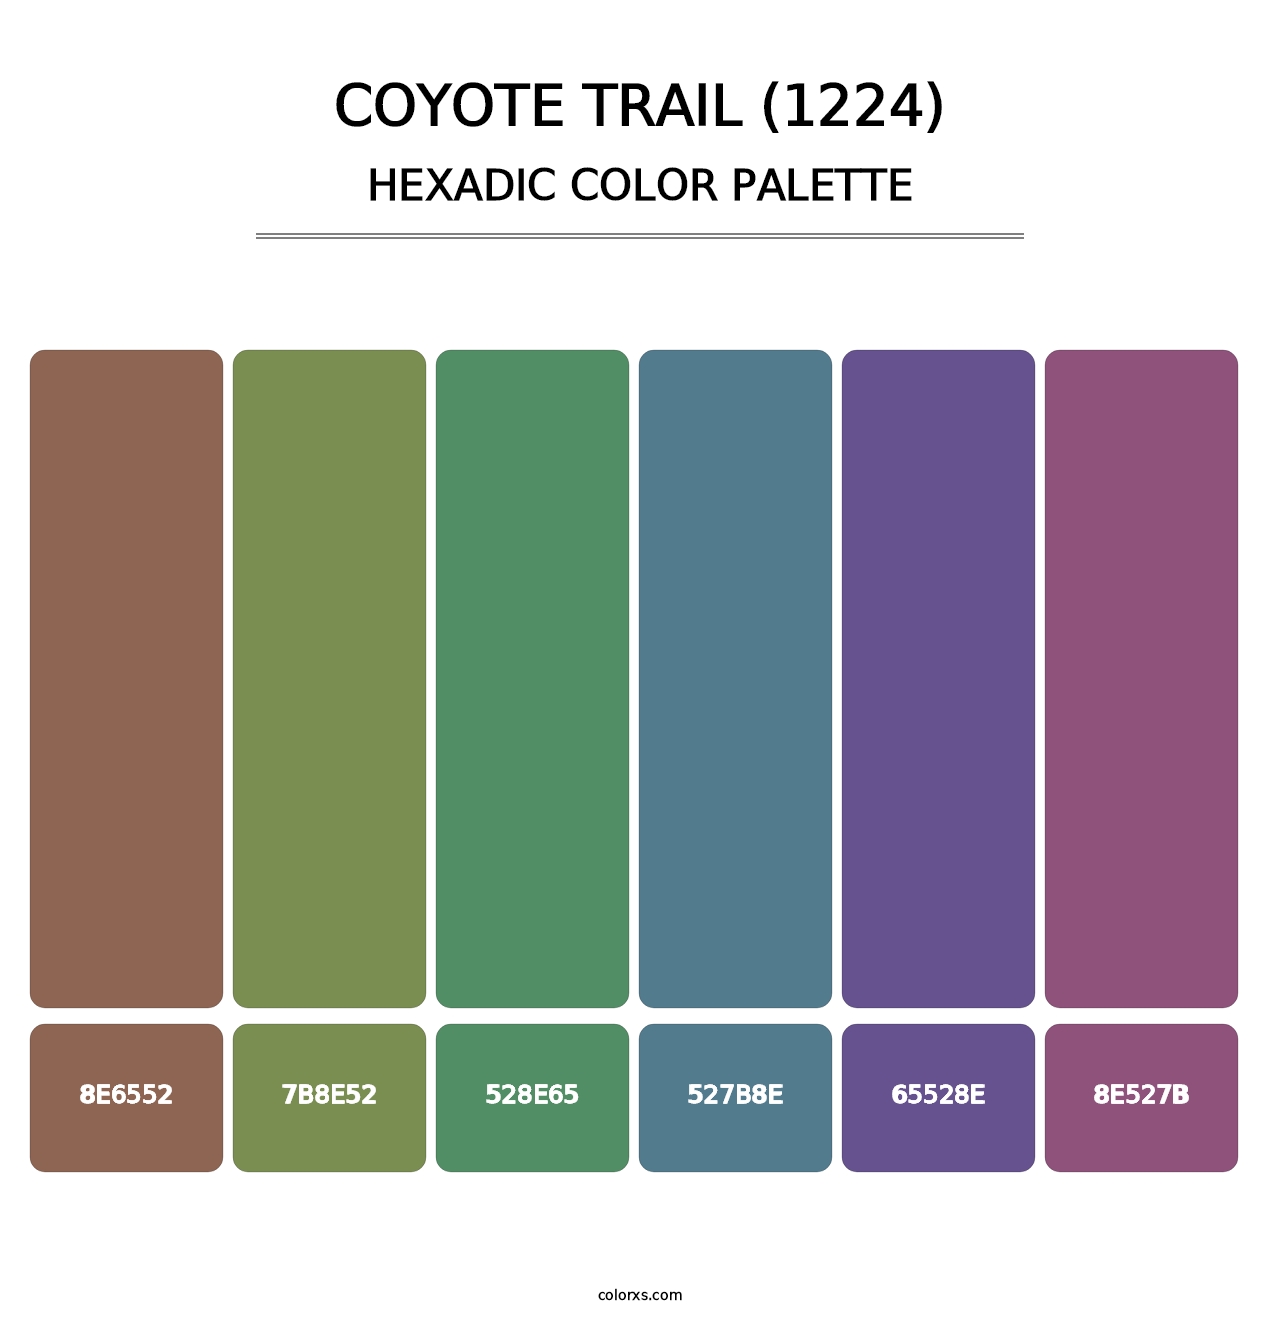 Coyote Trail (1224) - Hexadic Color Palette